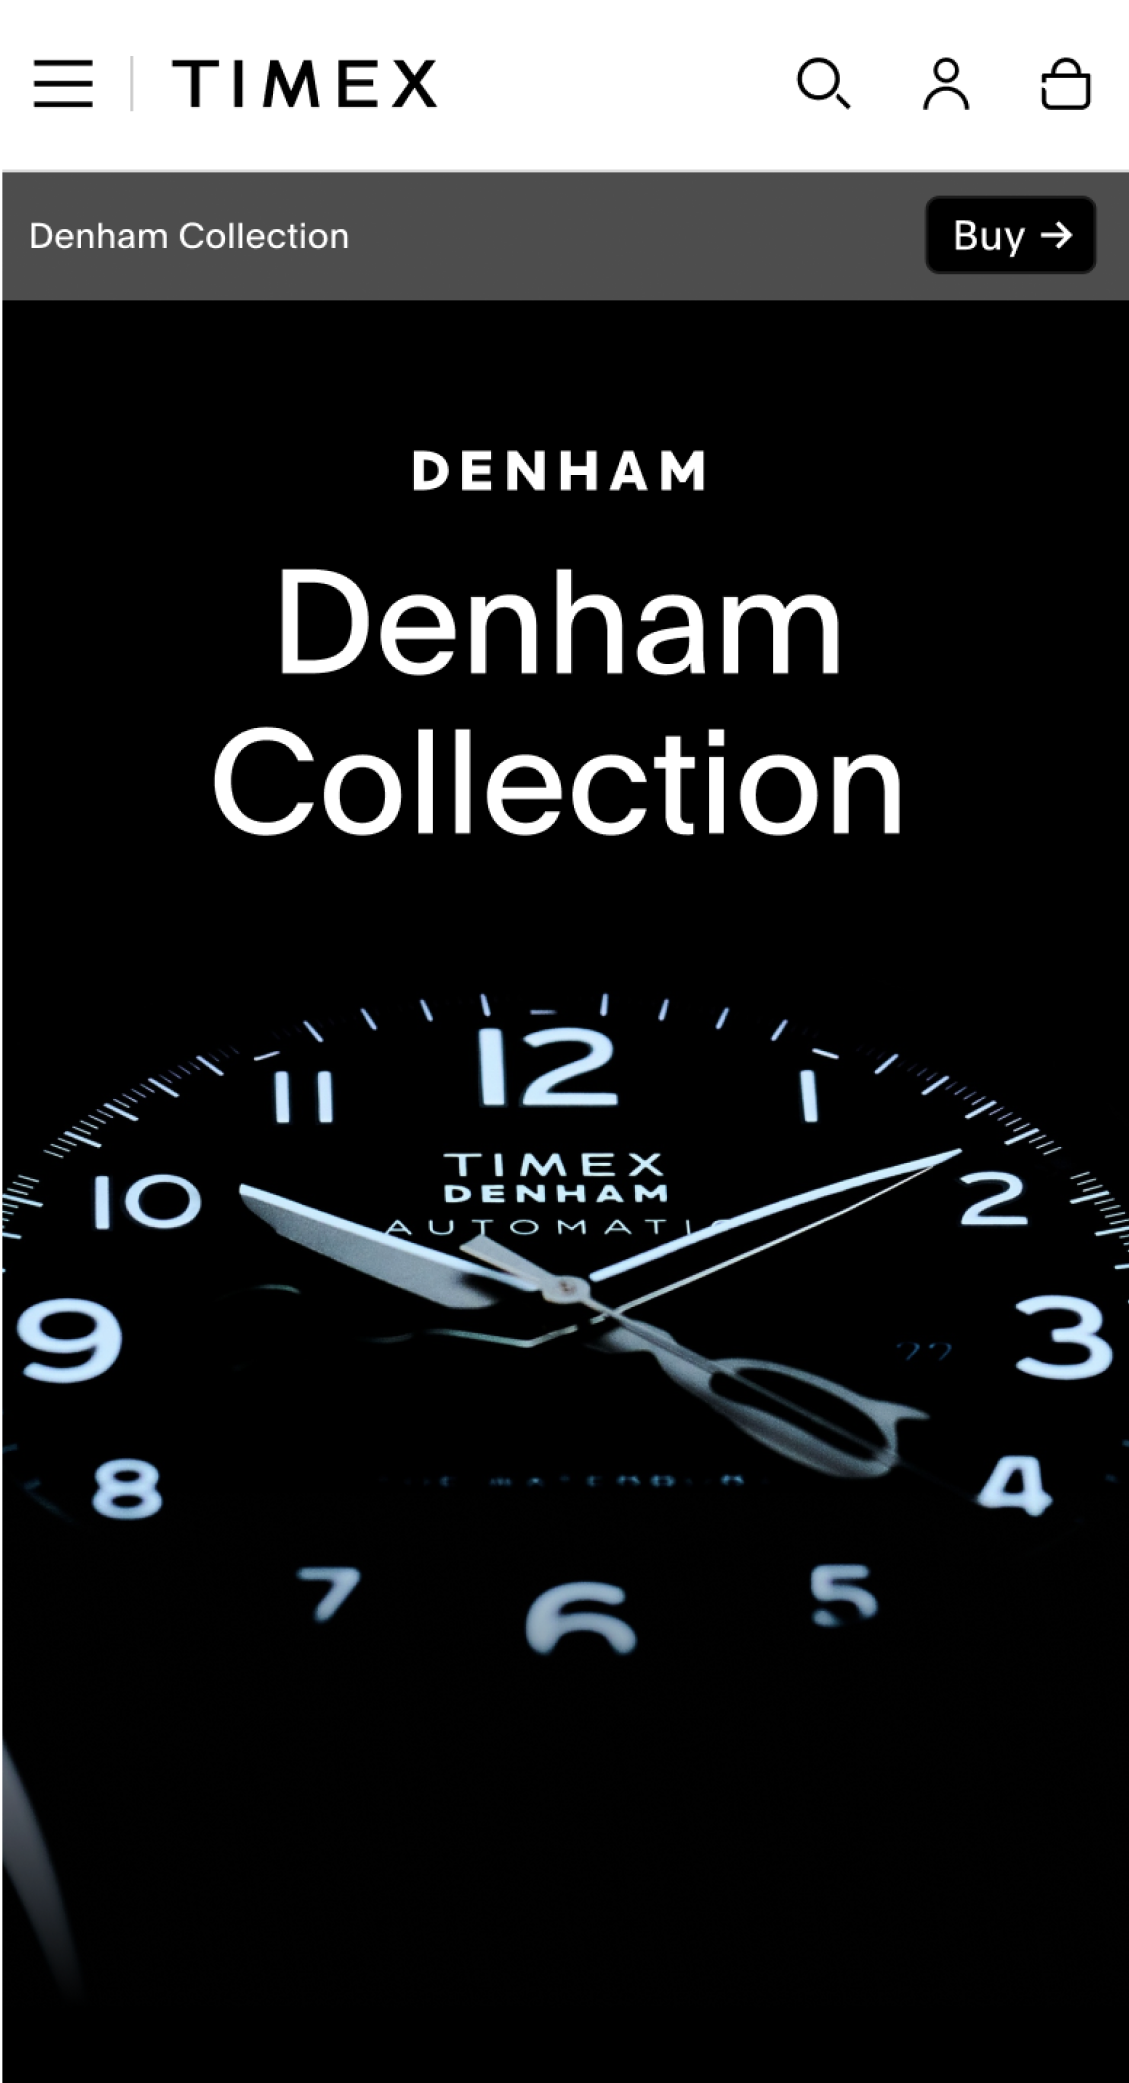 Mobile collection page on Timex's site featuring the Denham Collection